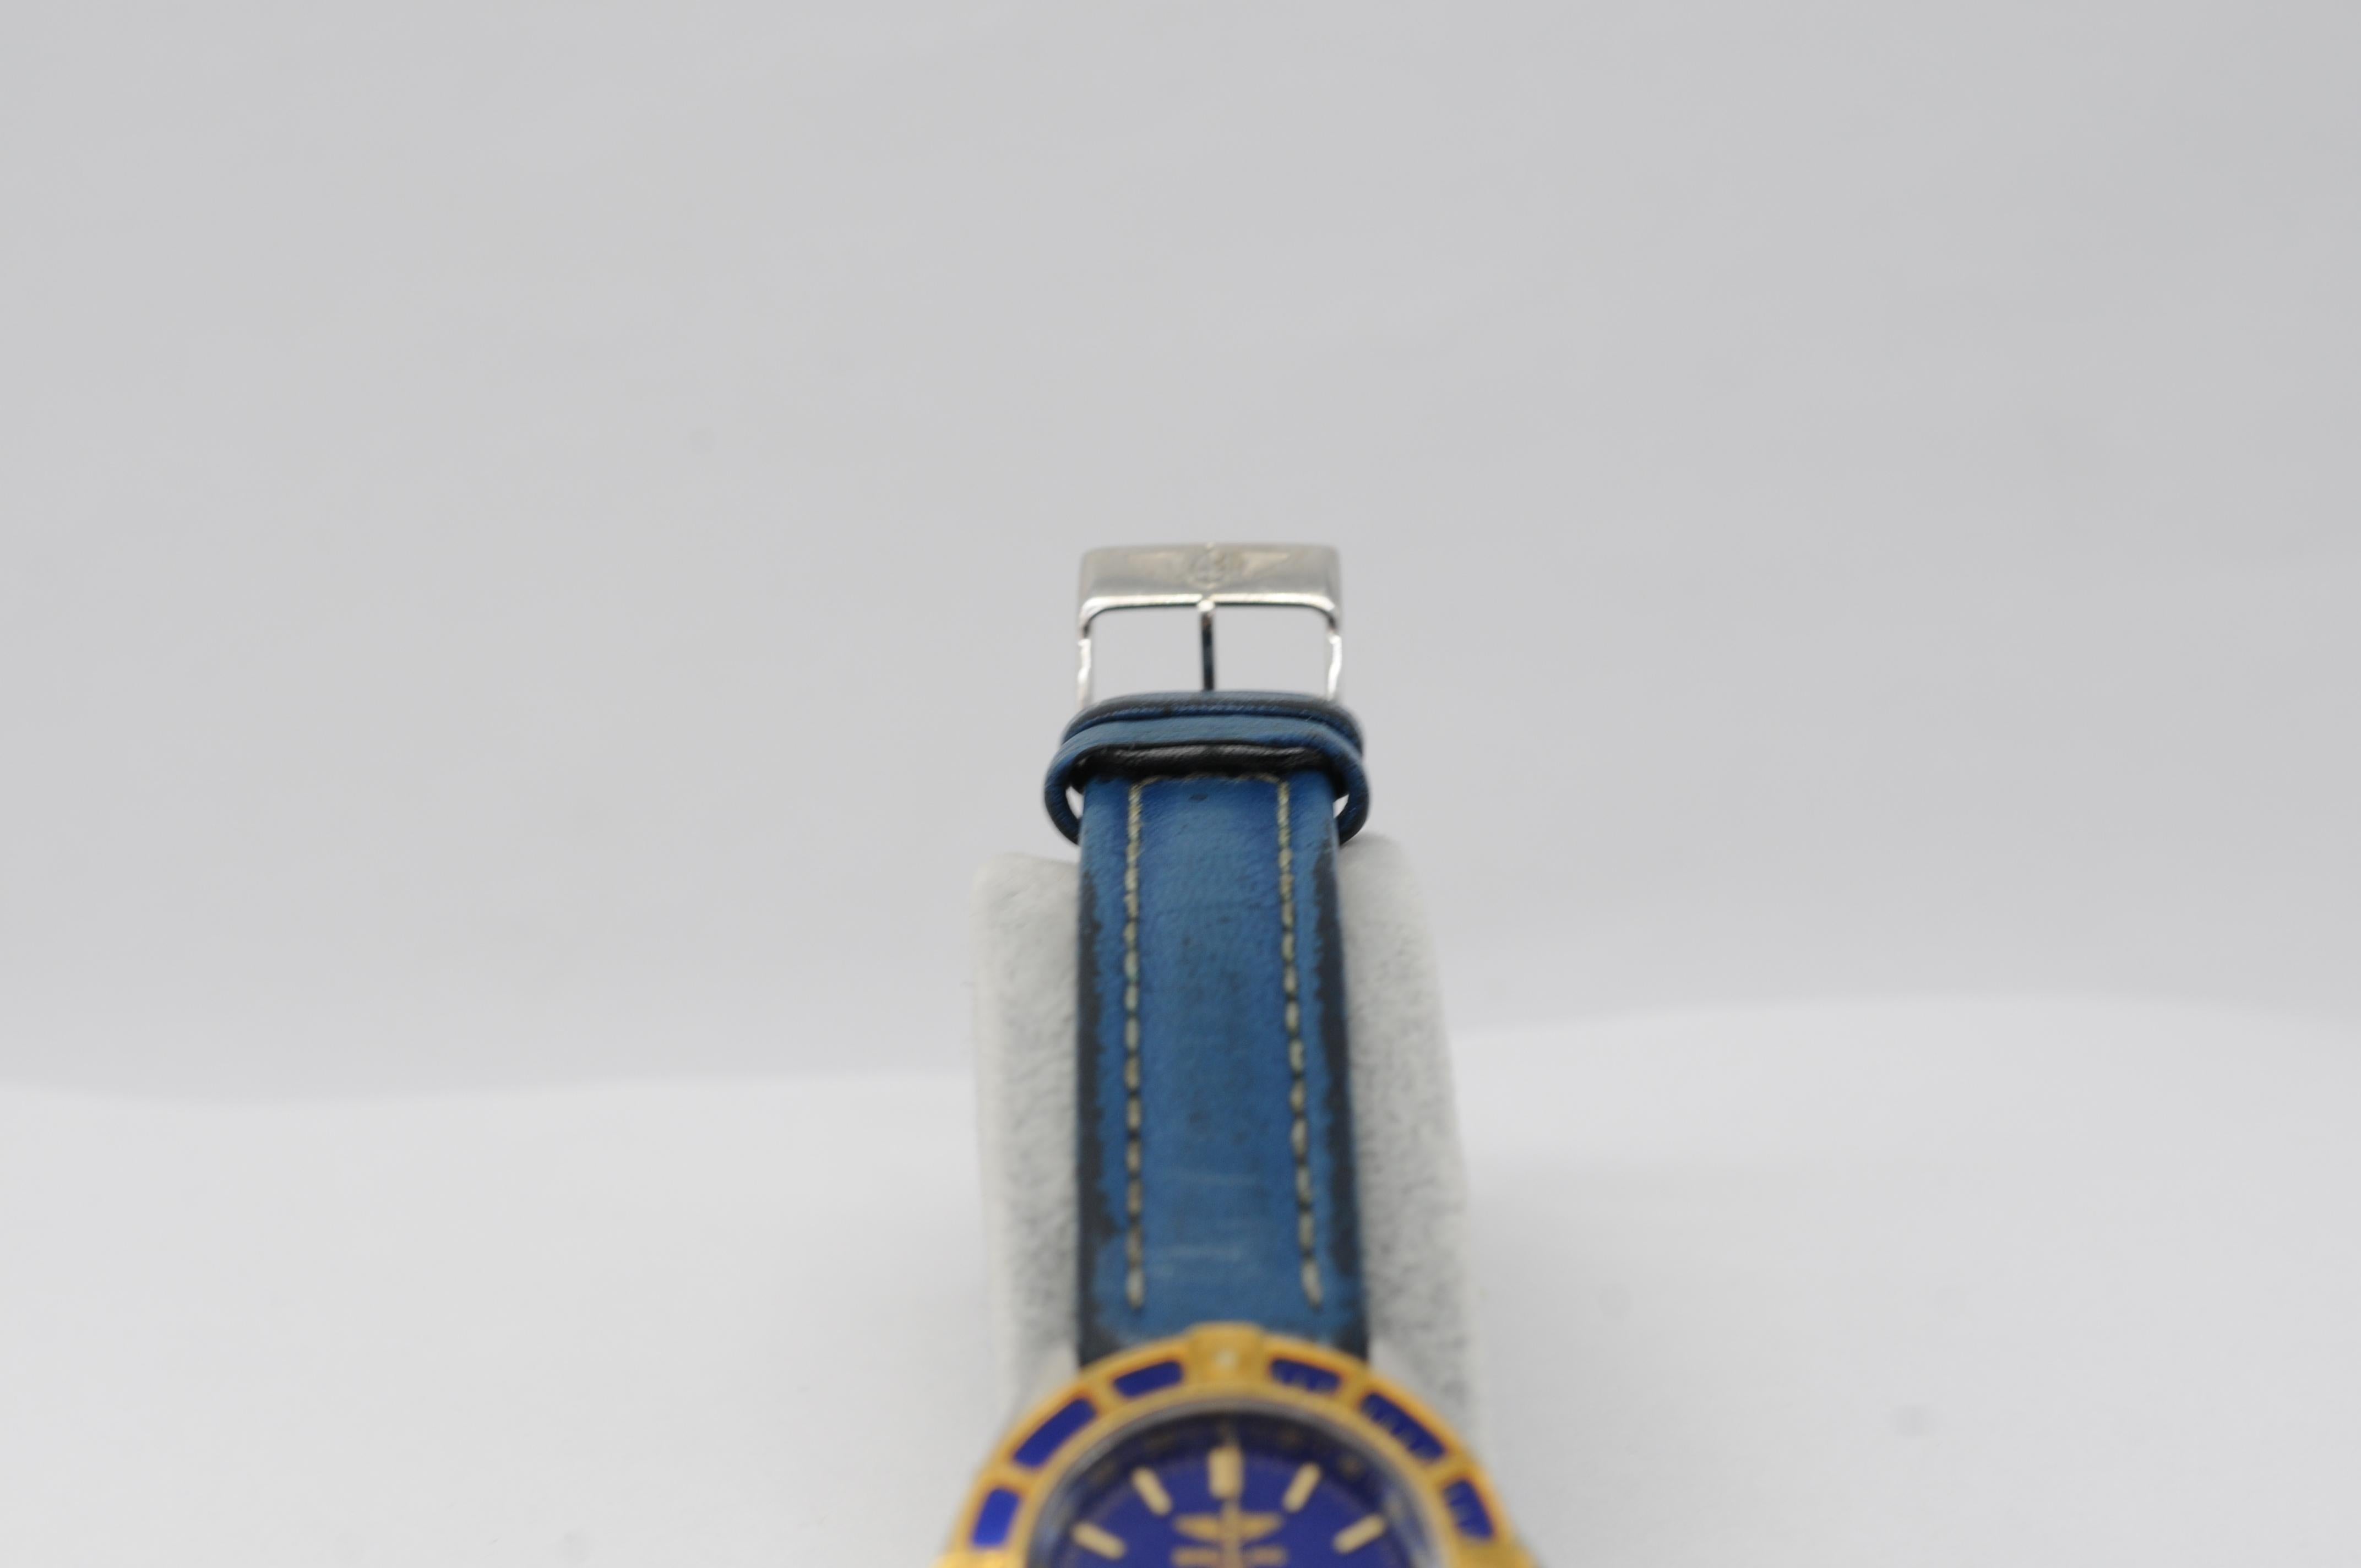 Aesthetic Movement Breitling Lady J D52065 with a deep blue leather strap For Sale